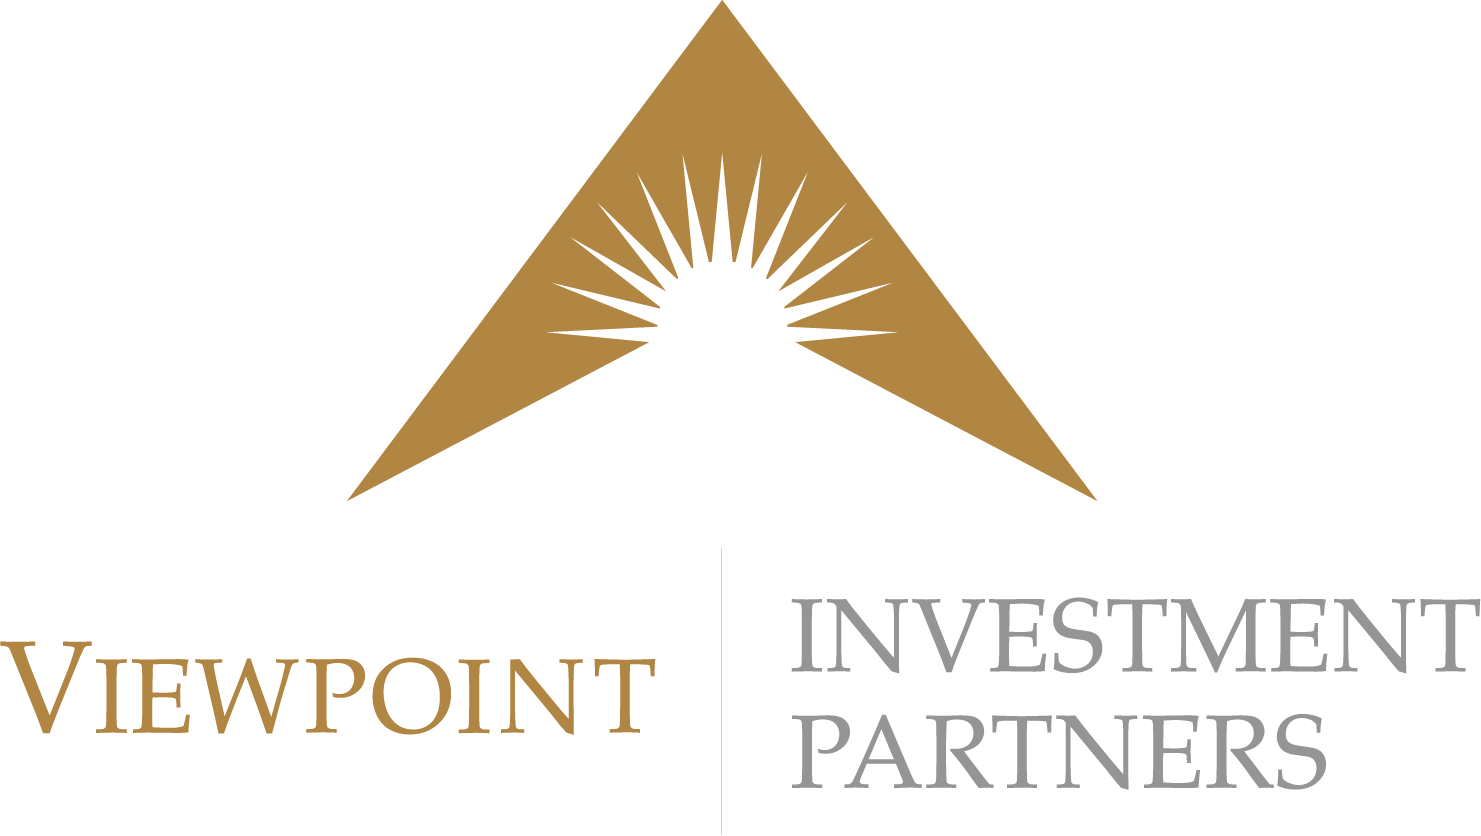 Viewpoint Investment Partners